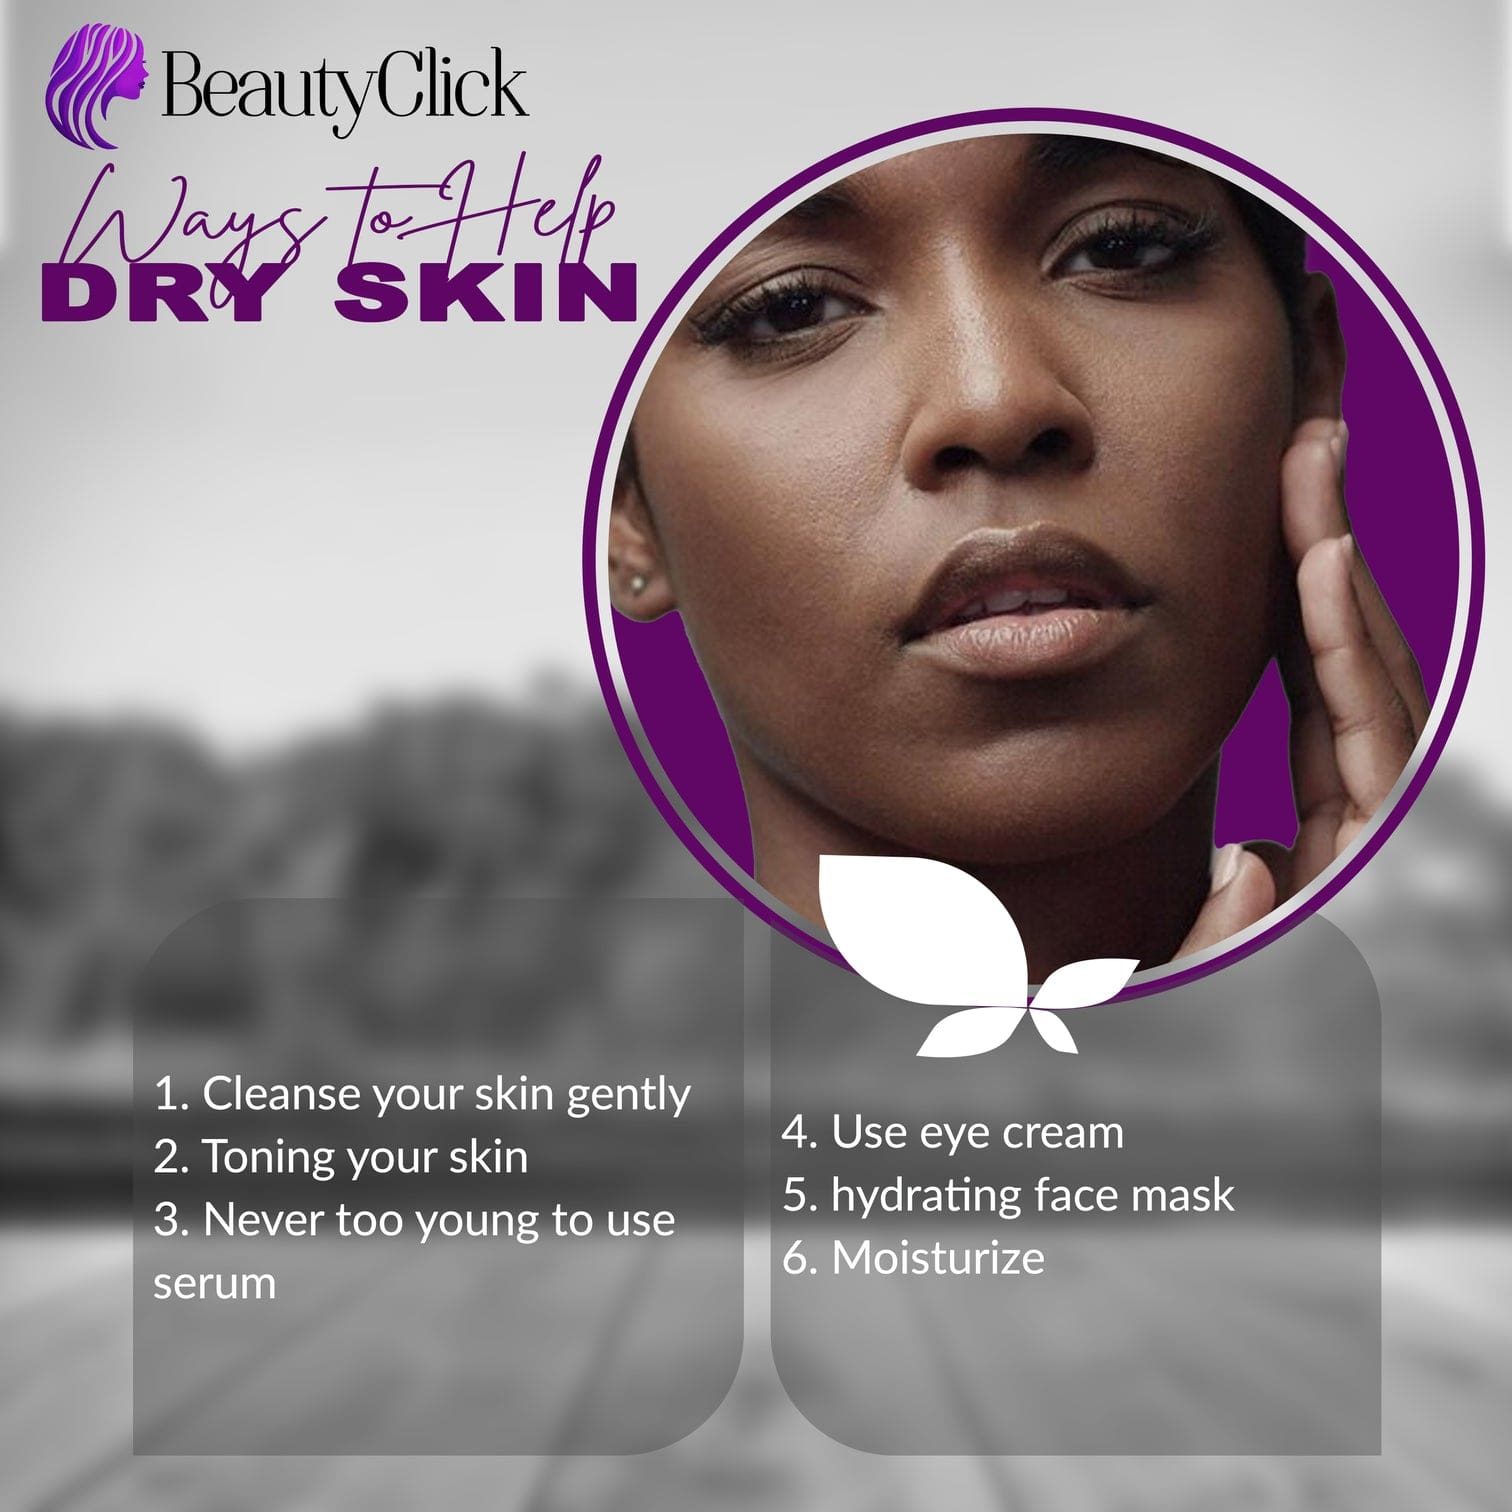 SKIN CARE ROUTINE FOR DRY SKIN